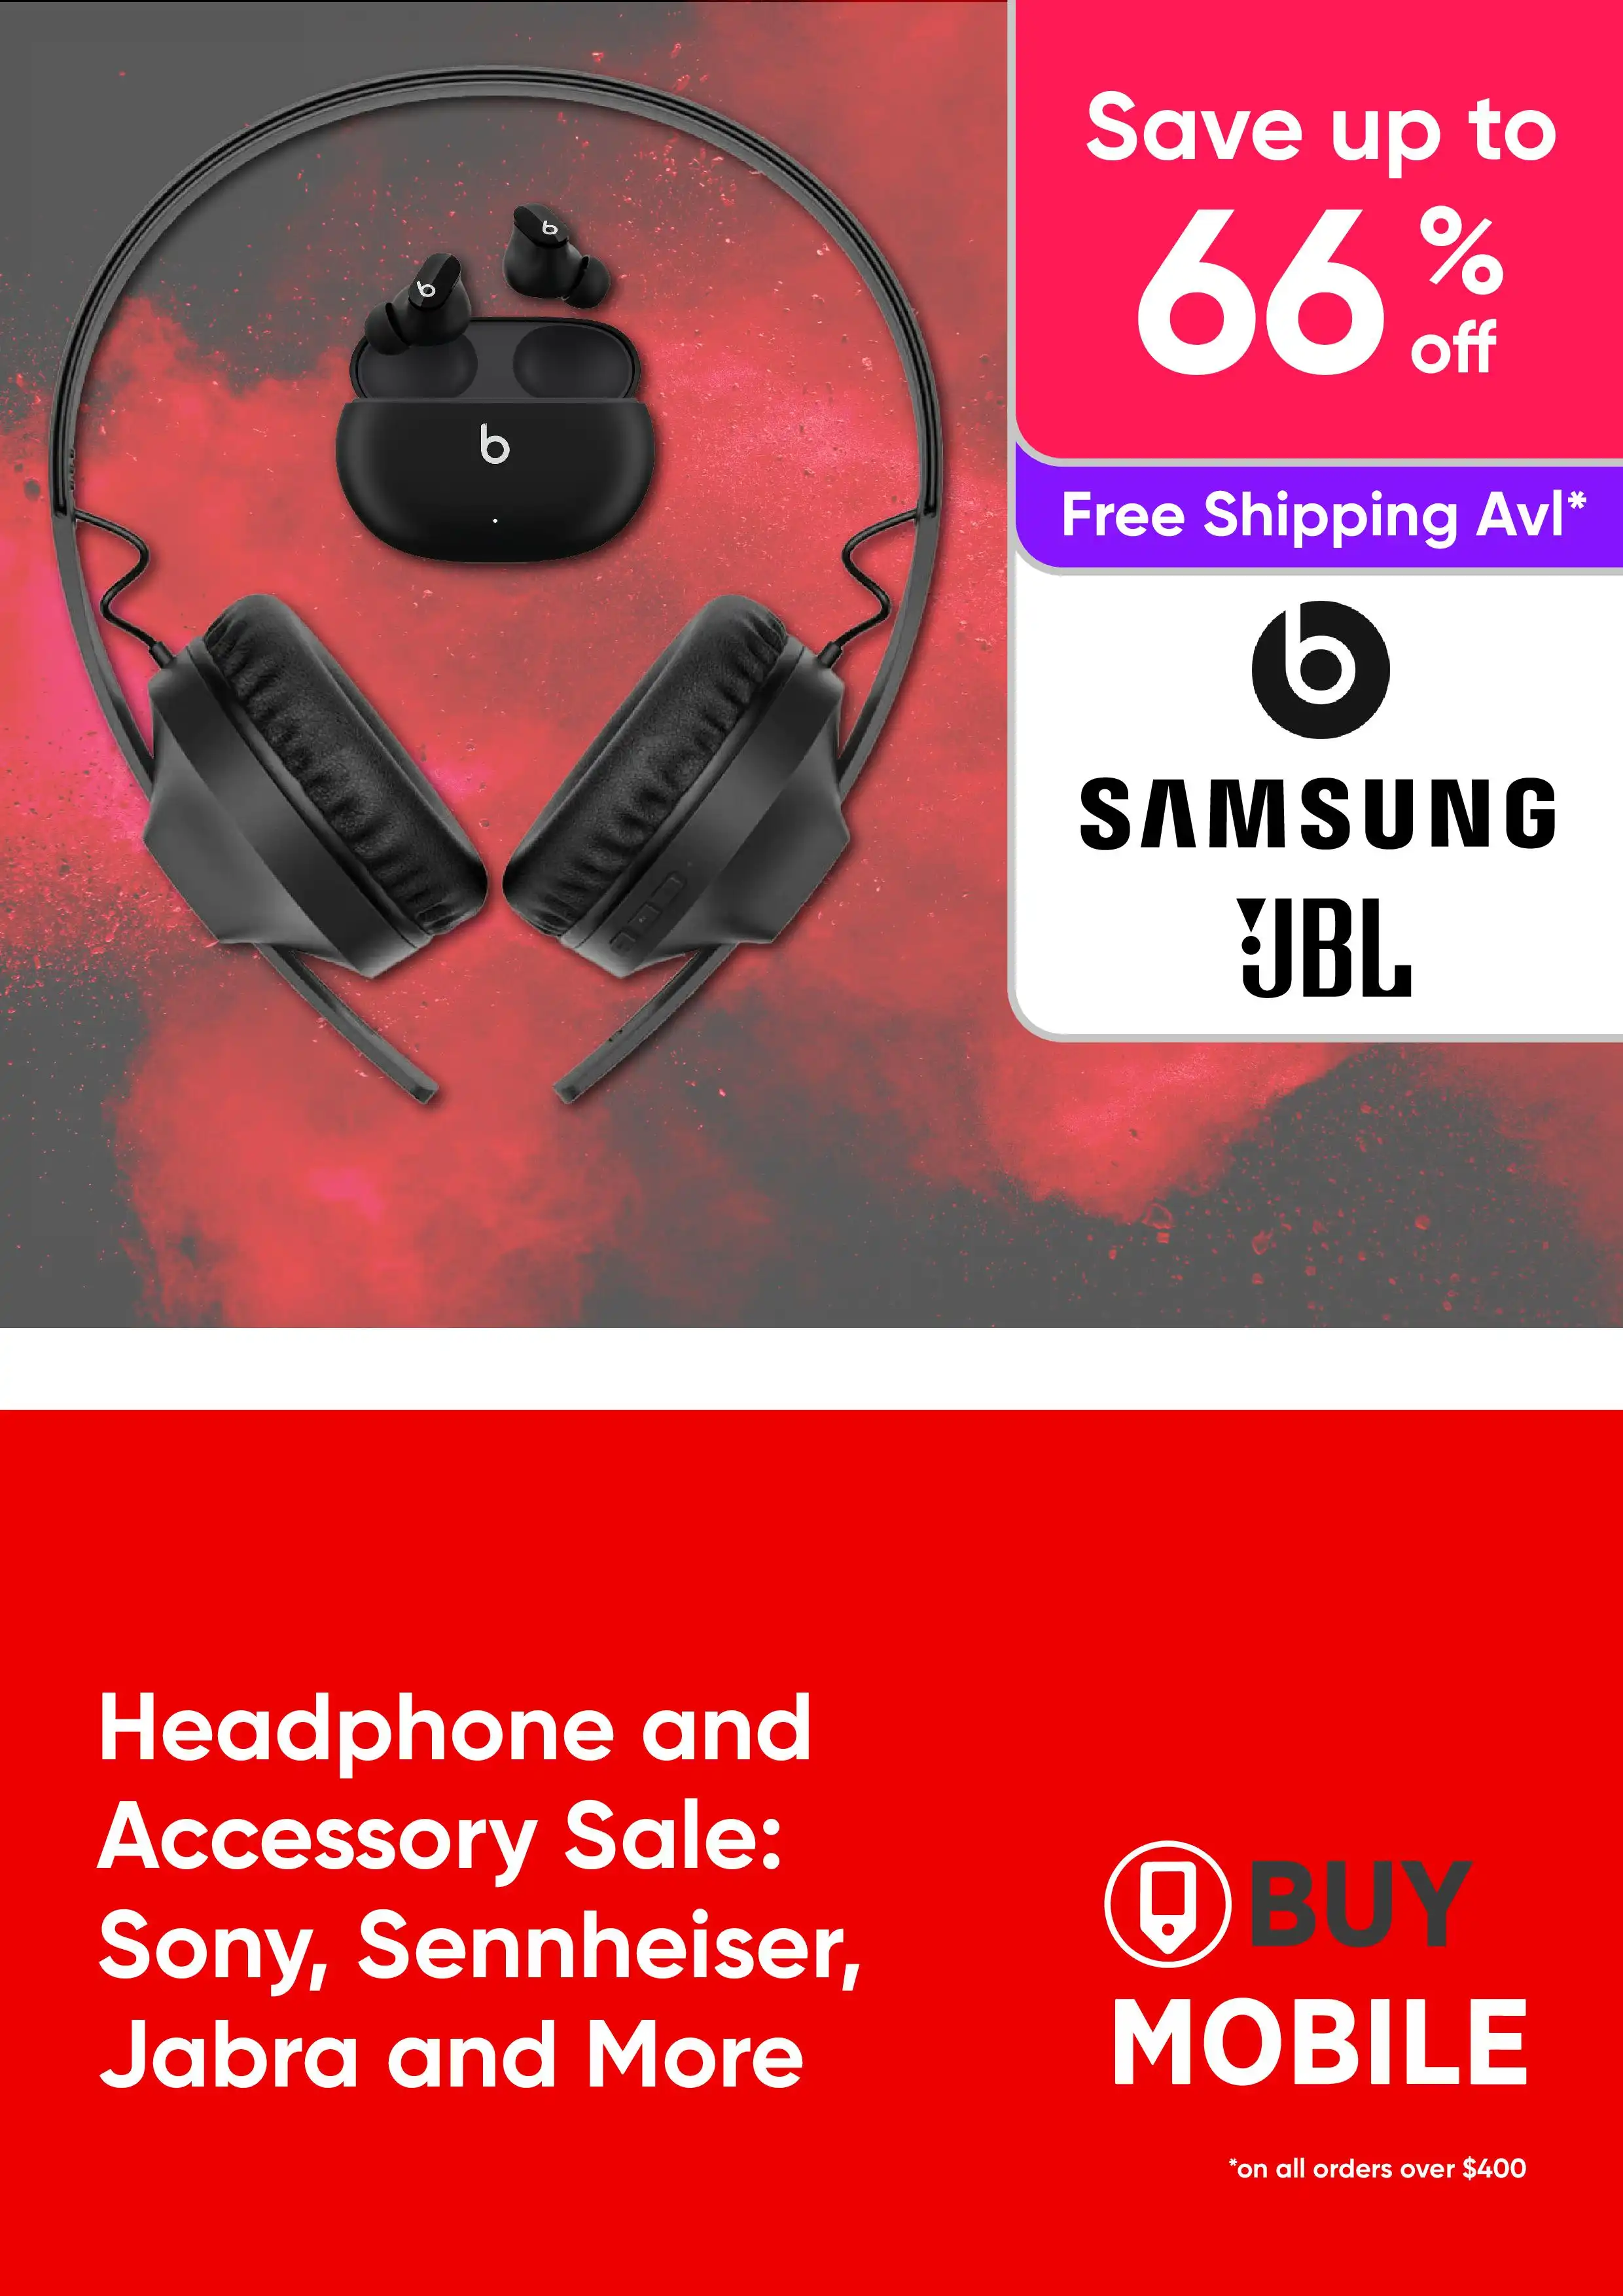 Headphone and Accessory Sale: Sony, Sennheiser, Jabra and More – up to 66% off